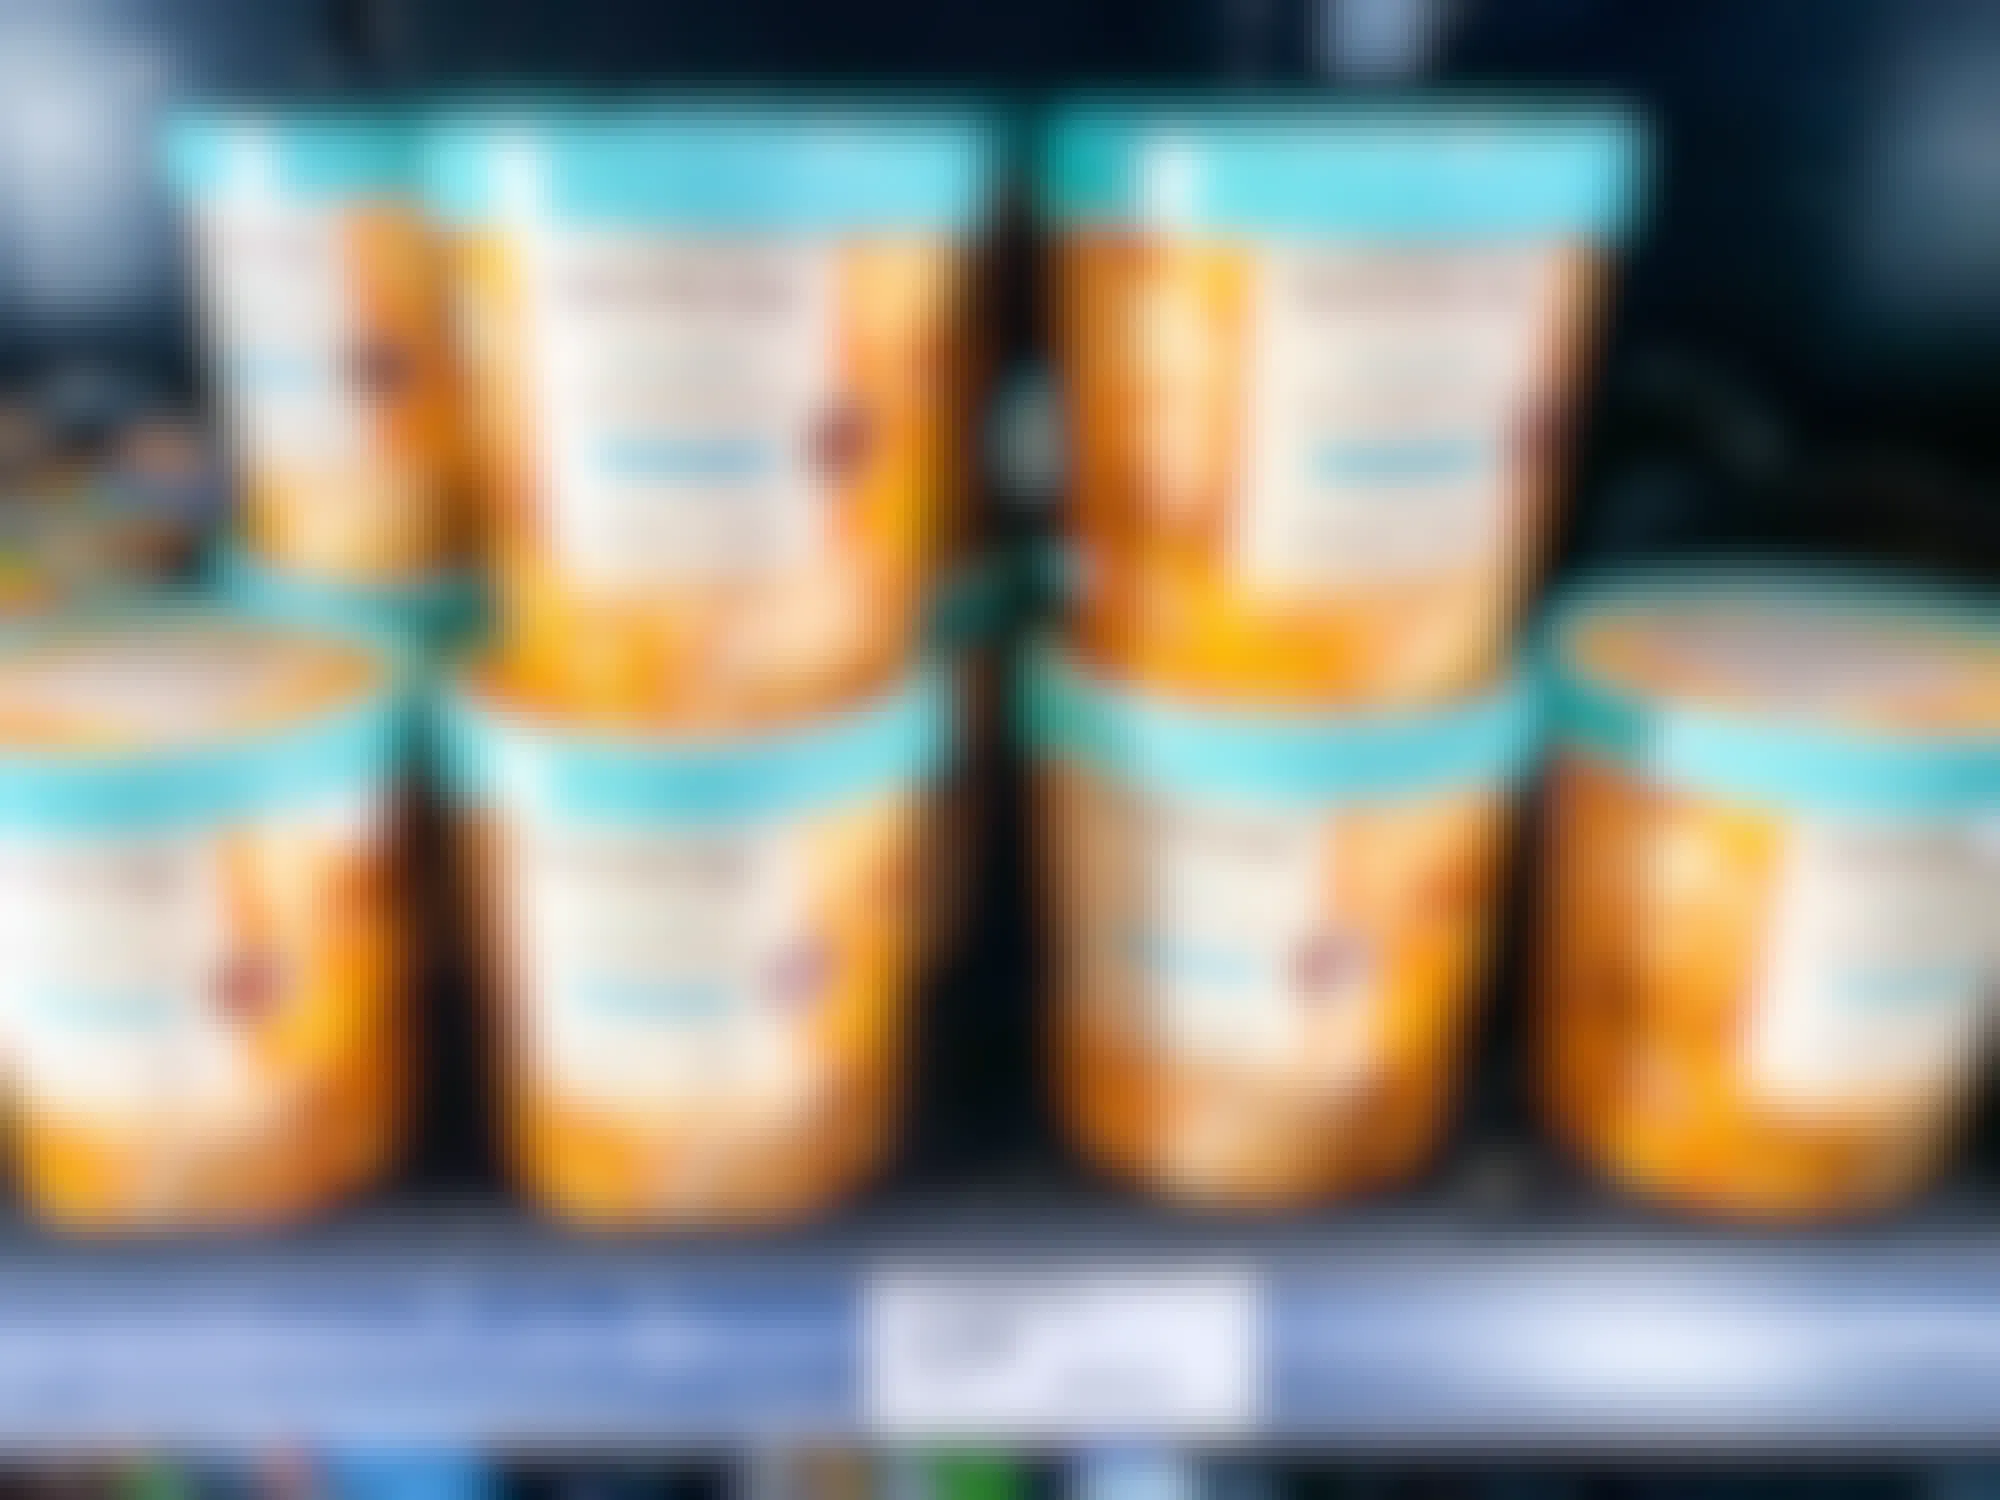 pint of favorite day pumpkin pie flavored ice cream at Target